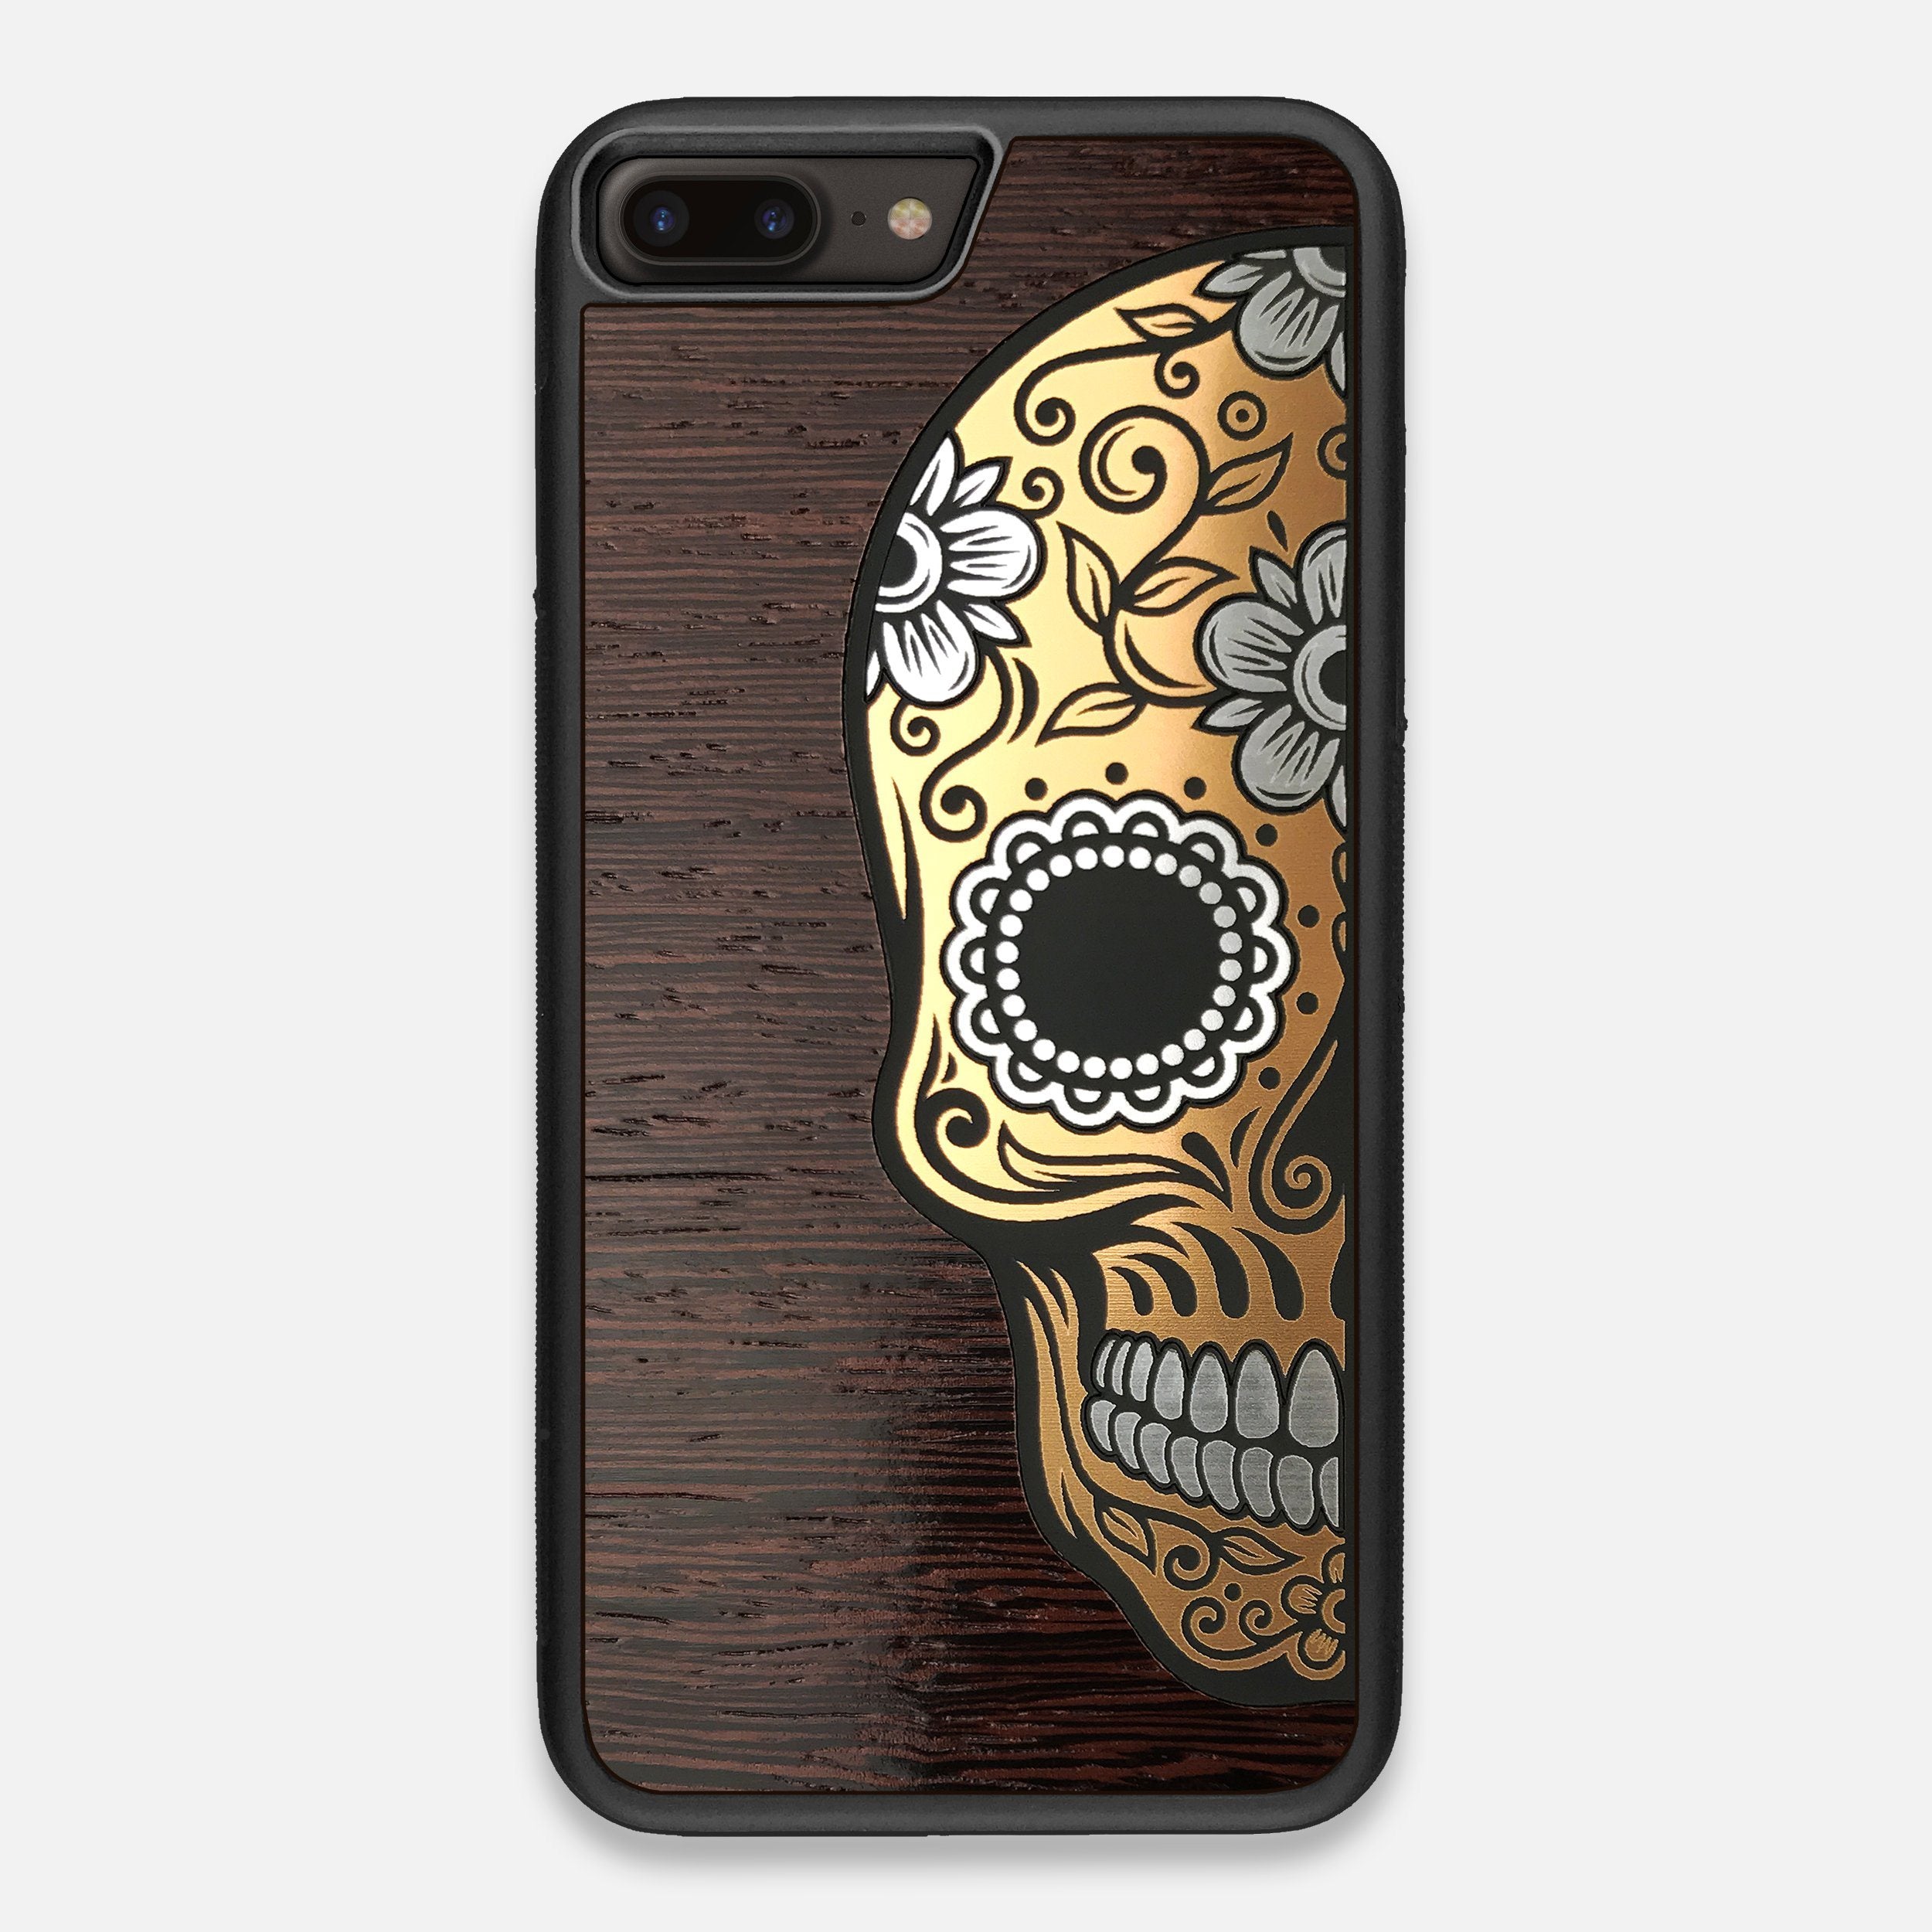 Front view of the Calavera Wood Sugar Skull Wood iPhone 7/8 Plus Case by Keyway Designs